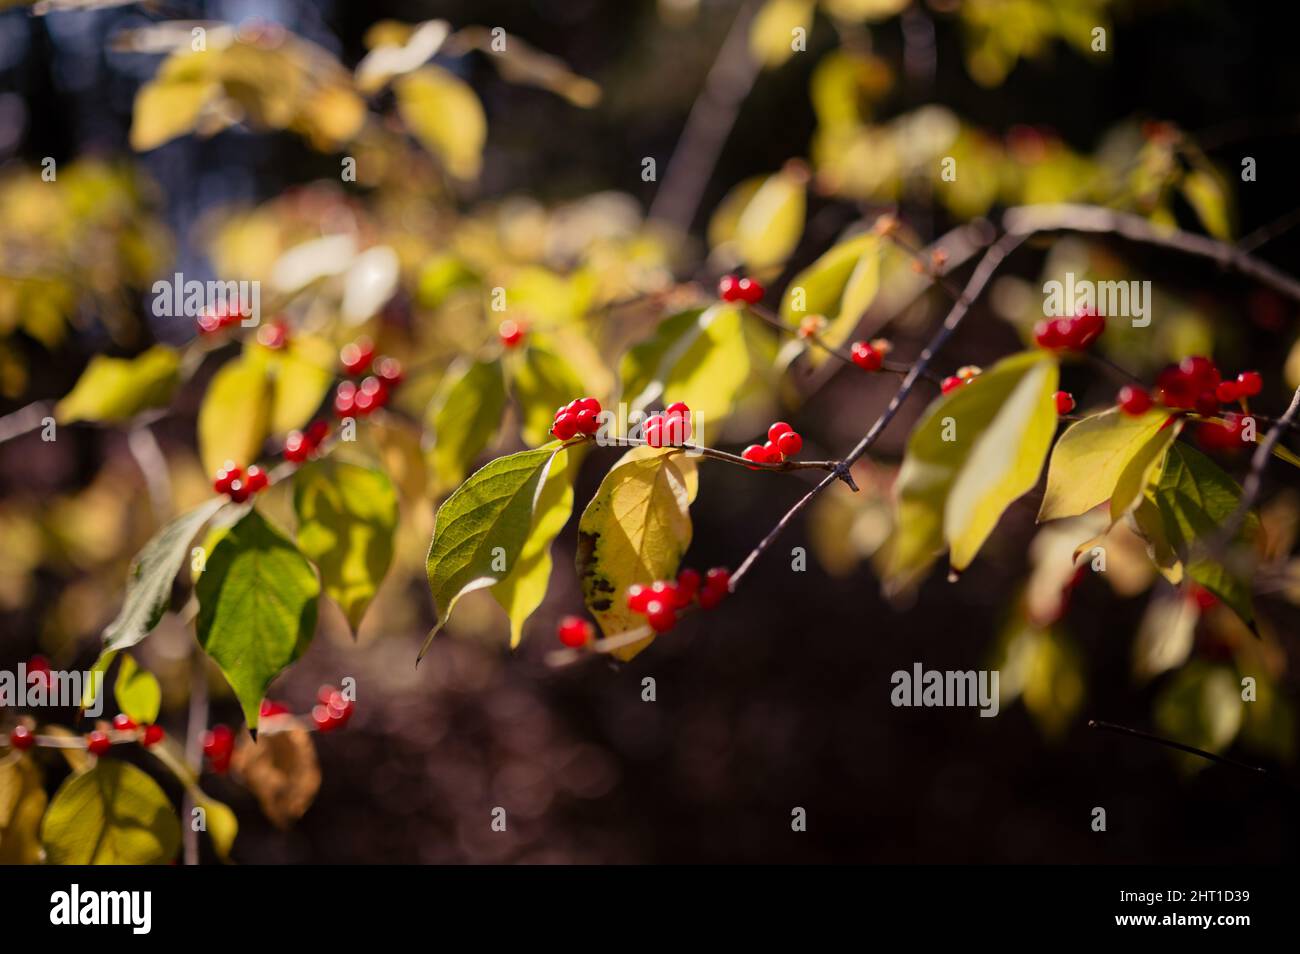 Closeup of the bush with red berries. Lonicera maackii, the Amur honeysuckle. Stock Photo